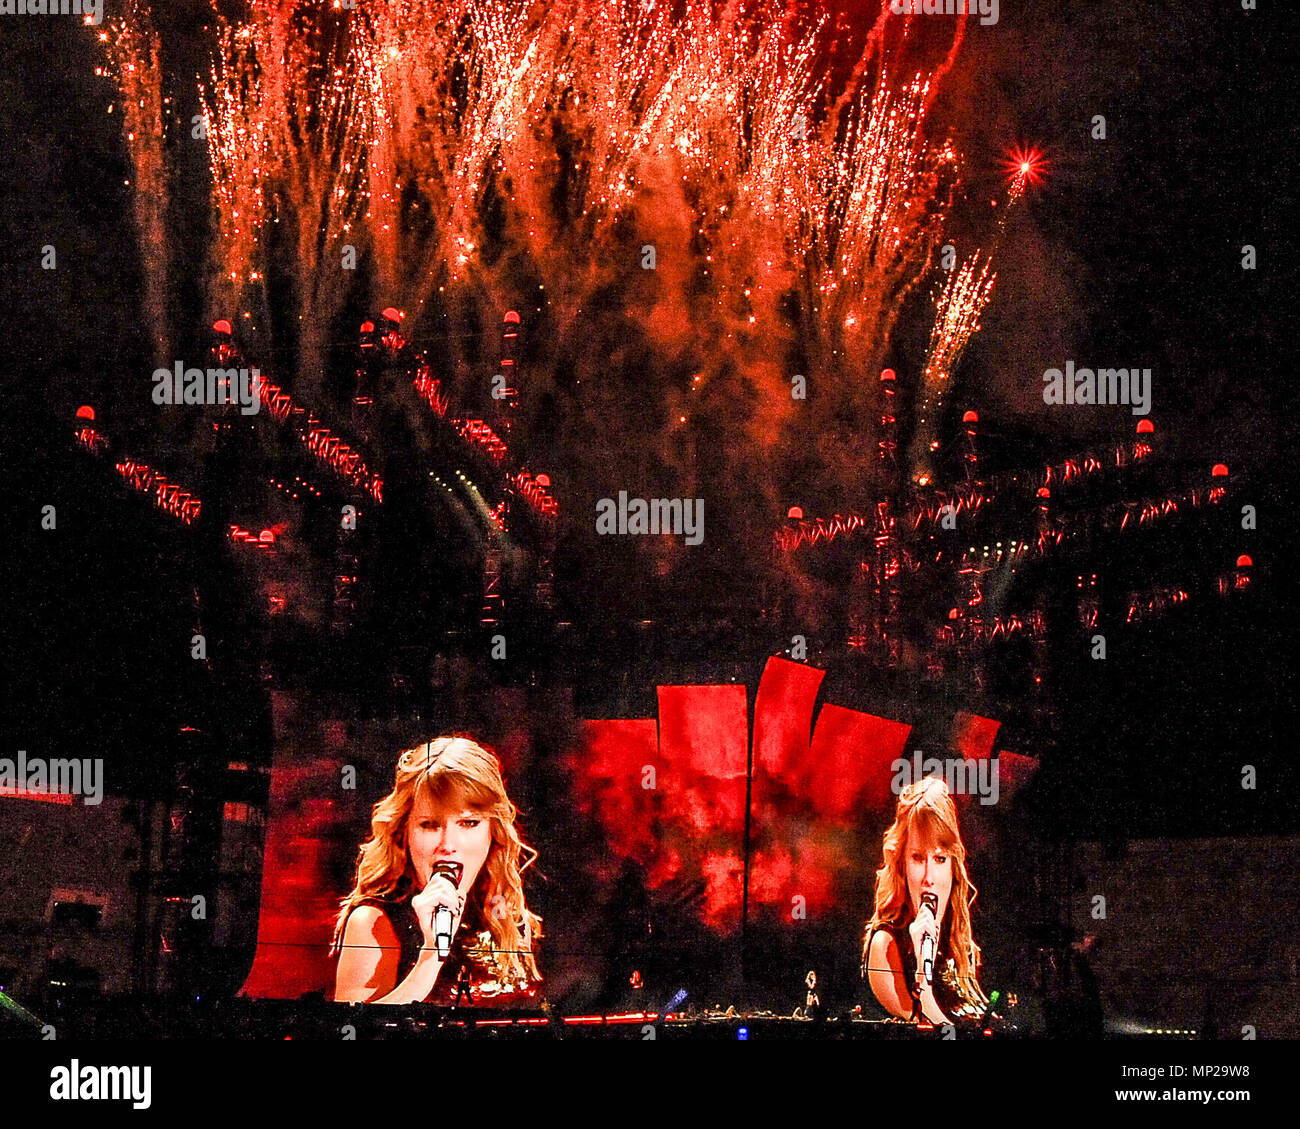 Pasadena, CA, USA. 18th May, 2018. Taylor Swift performs live on stage during the Reputation Stadium Tour at the Rose Bowl on Friday, May 18, 2018, in Pasadena, Calif. Taylor Alison Swift is an American singer-songwriter. One of the leading contemporary recording artists, she is known for narrative songs about her personal life, which have received widespread media coverage. Multiple BBMA 2018 Winner. Credit: Dave Safley/ZUMA Wire/Alamy Live News Stock Photo